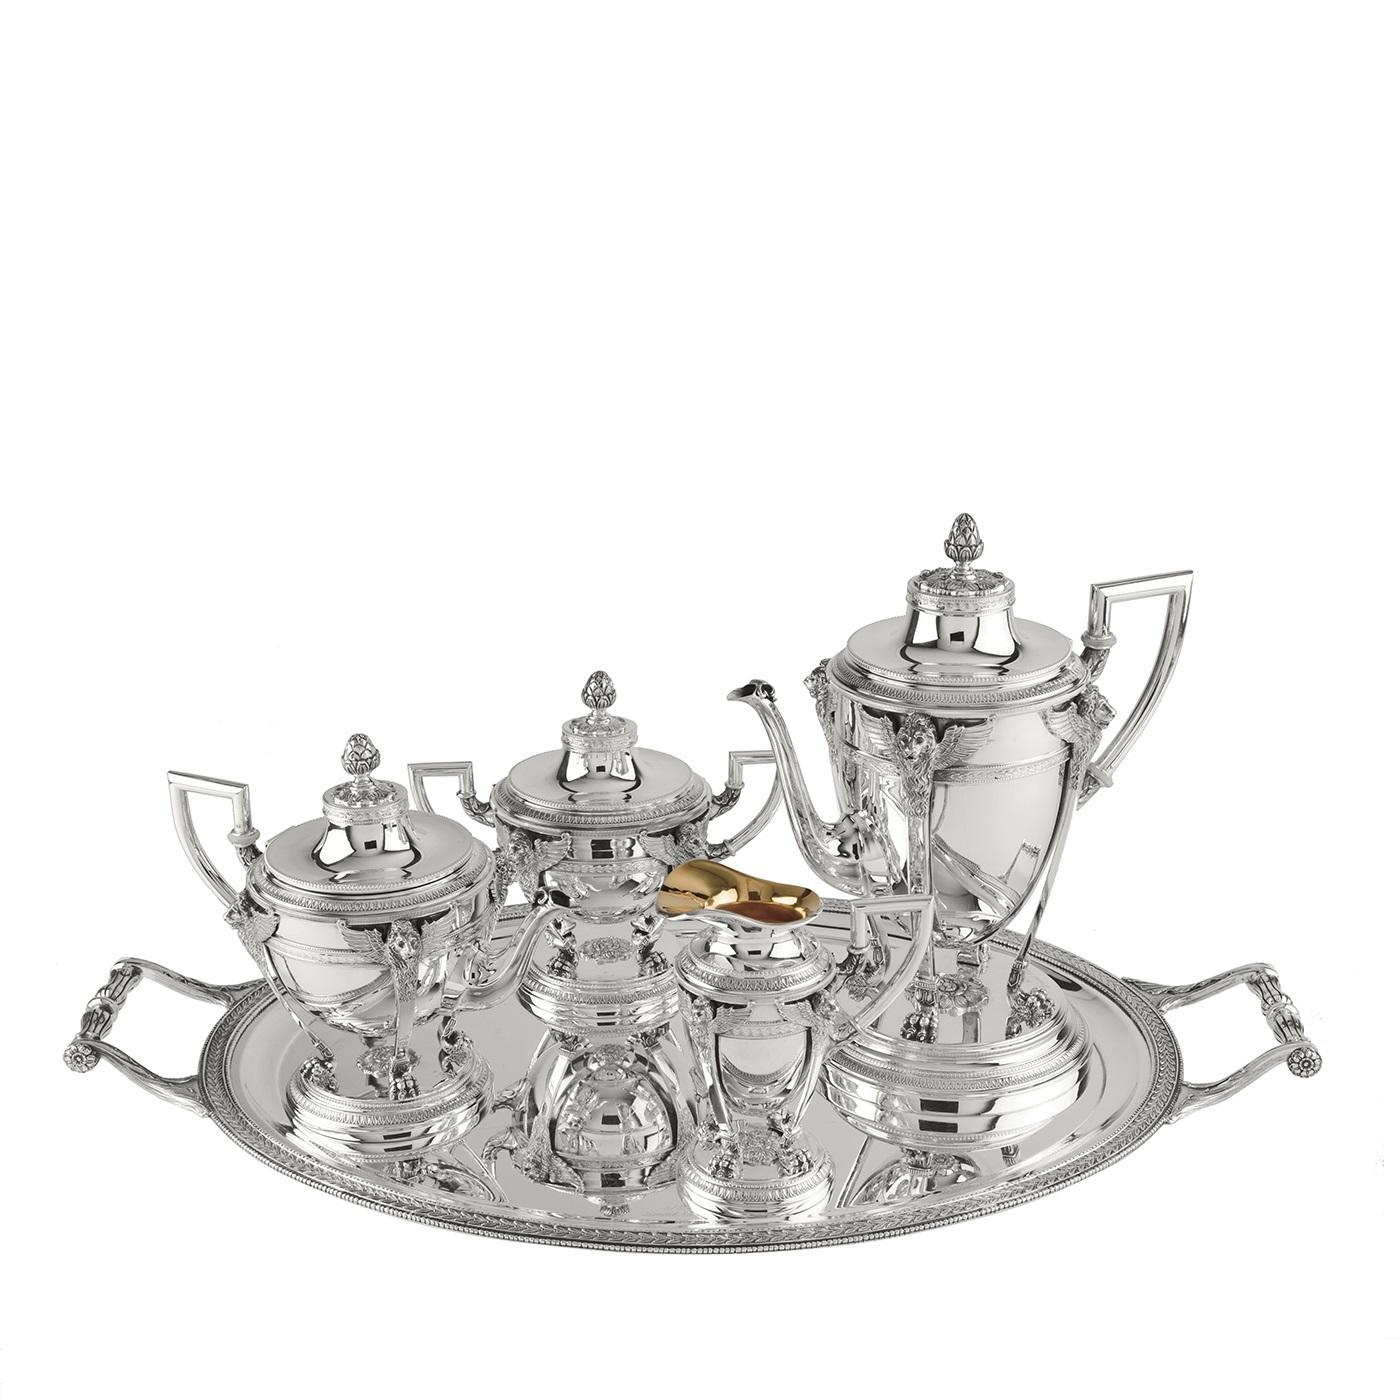 This sophisticated coffee set entirely made in silver will bring a touch of lavish elegance to any table. It is accompanied by an oval tray with rectangular ornate handles and a delicate decoration that runs throughout its edges, inspired by the